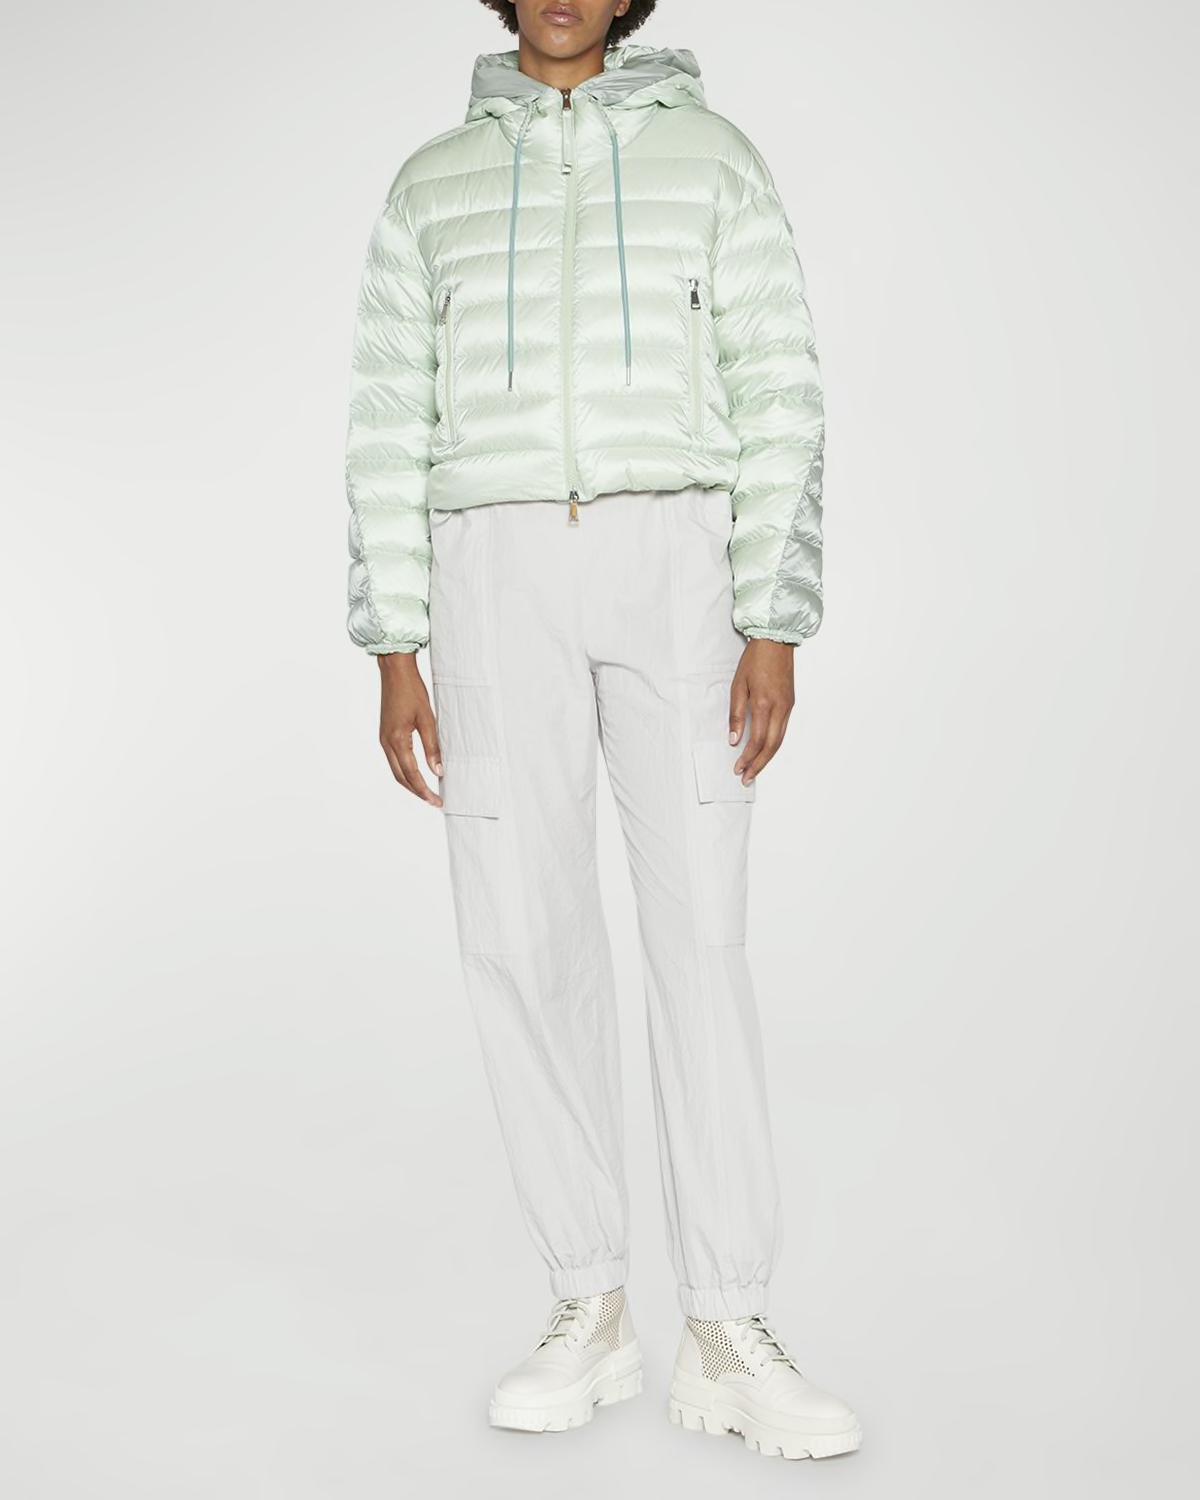 Sylans Hooded Puffer Jacket by MONCLER